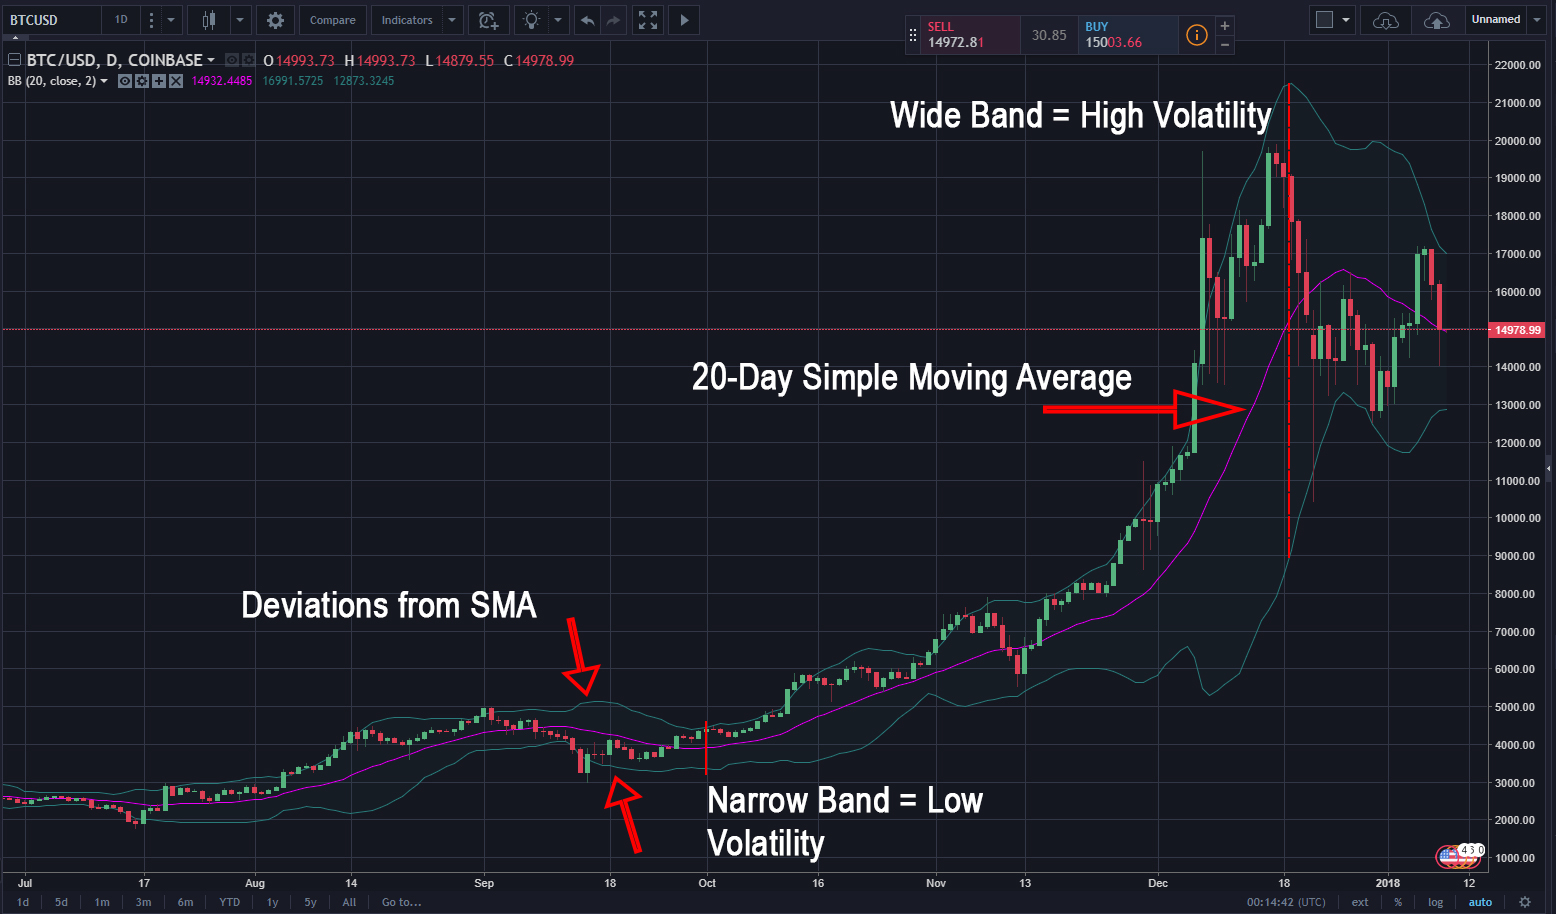 bollinger band settings for crypto